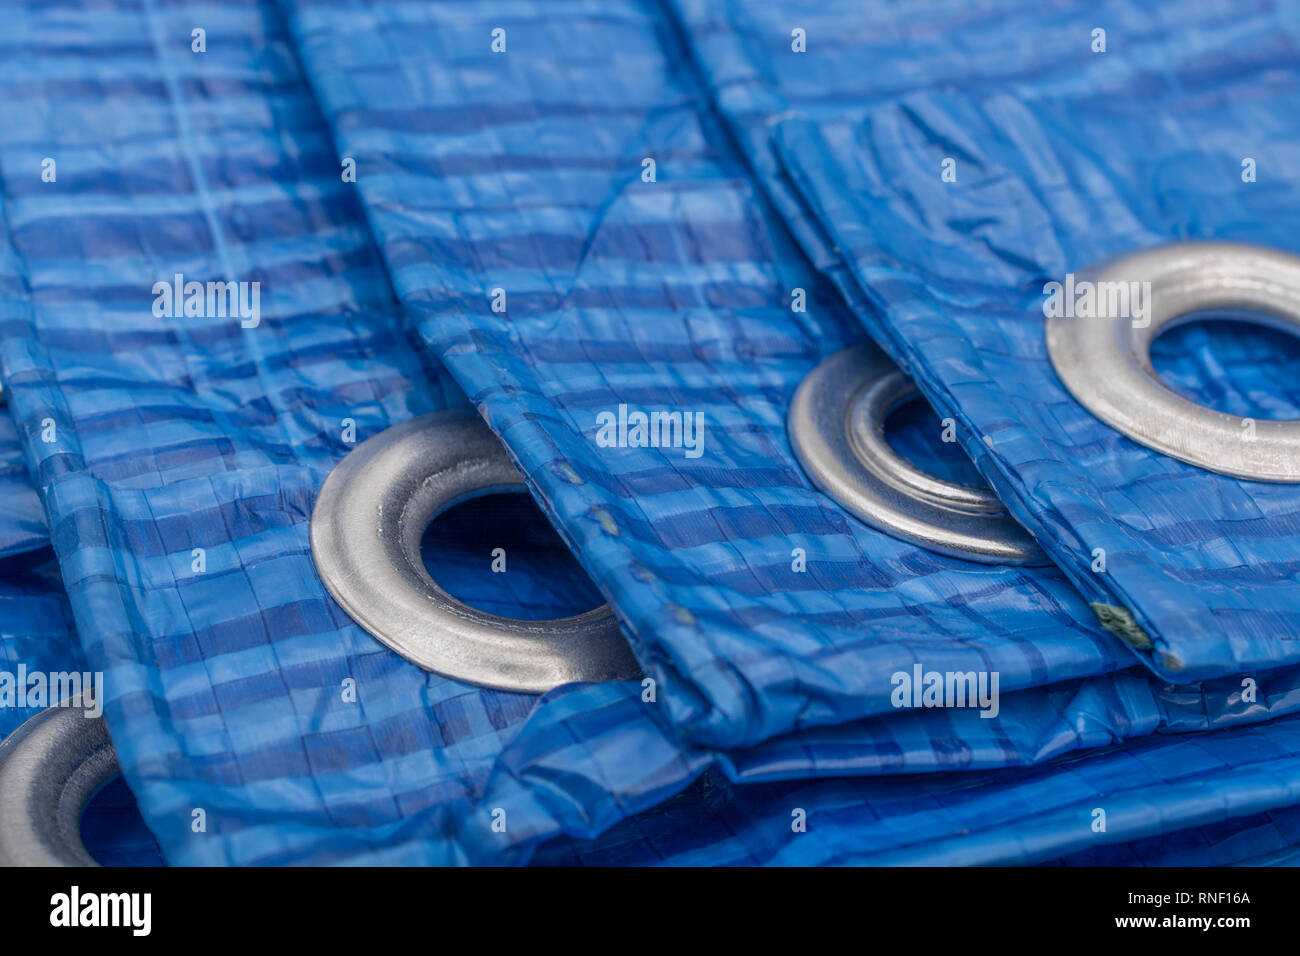 Discover A Whole New World Of Wholesale plastic grommets for tarps